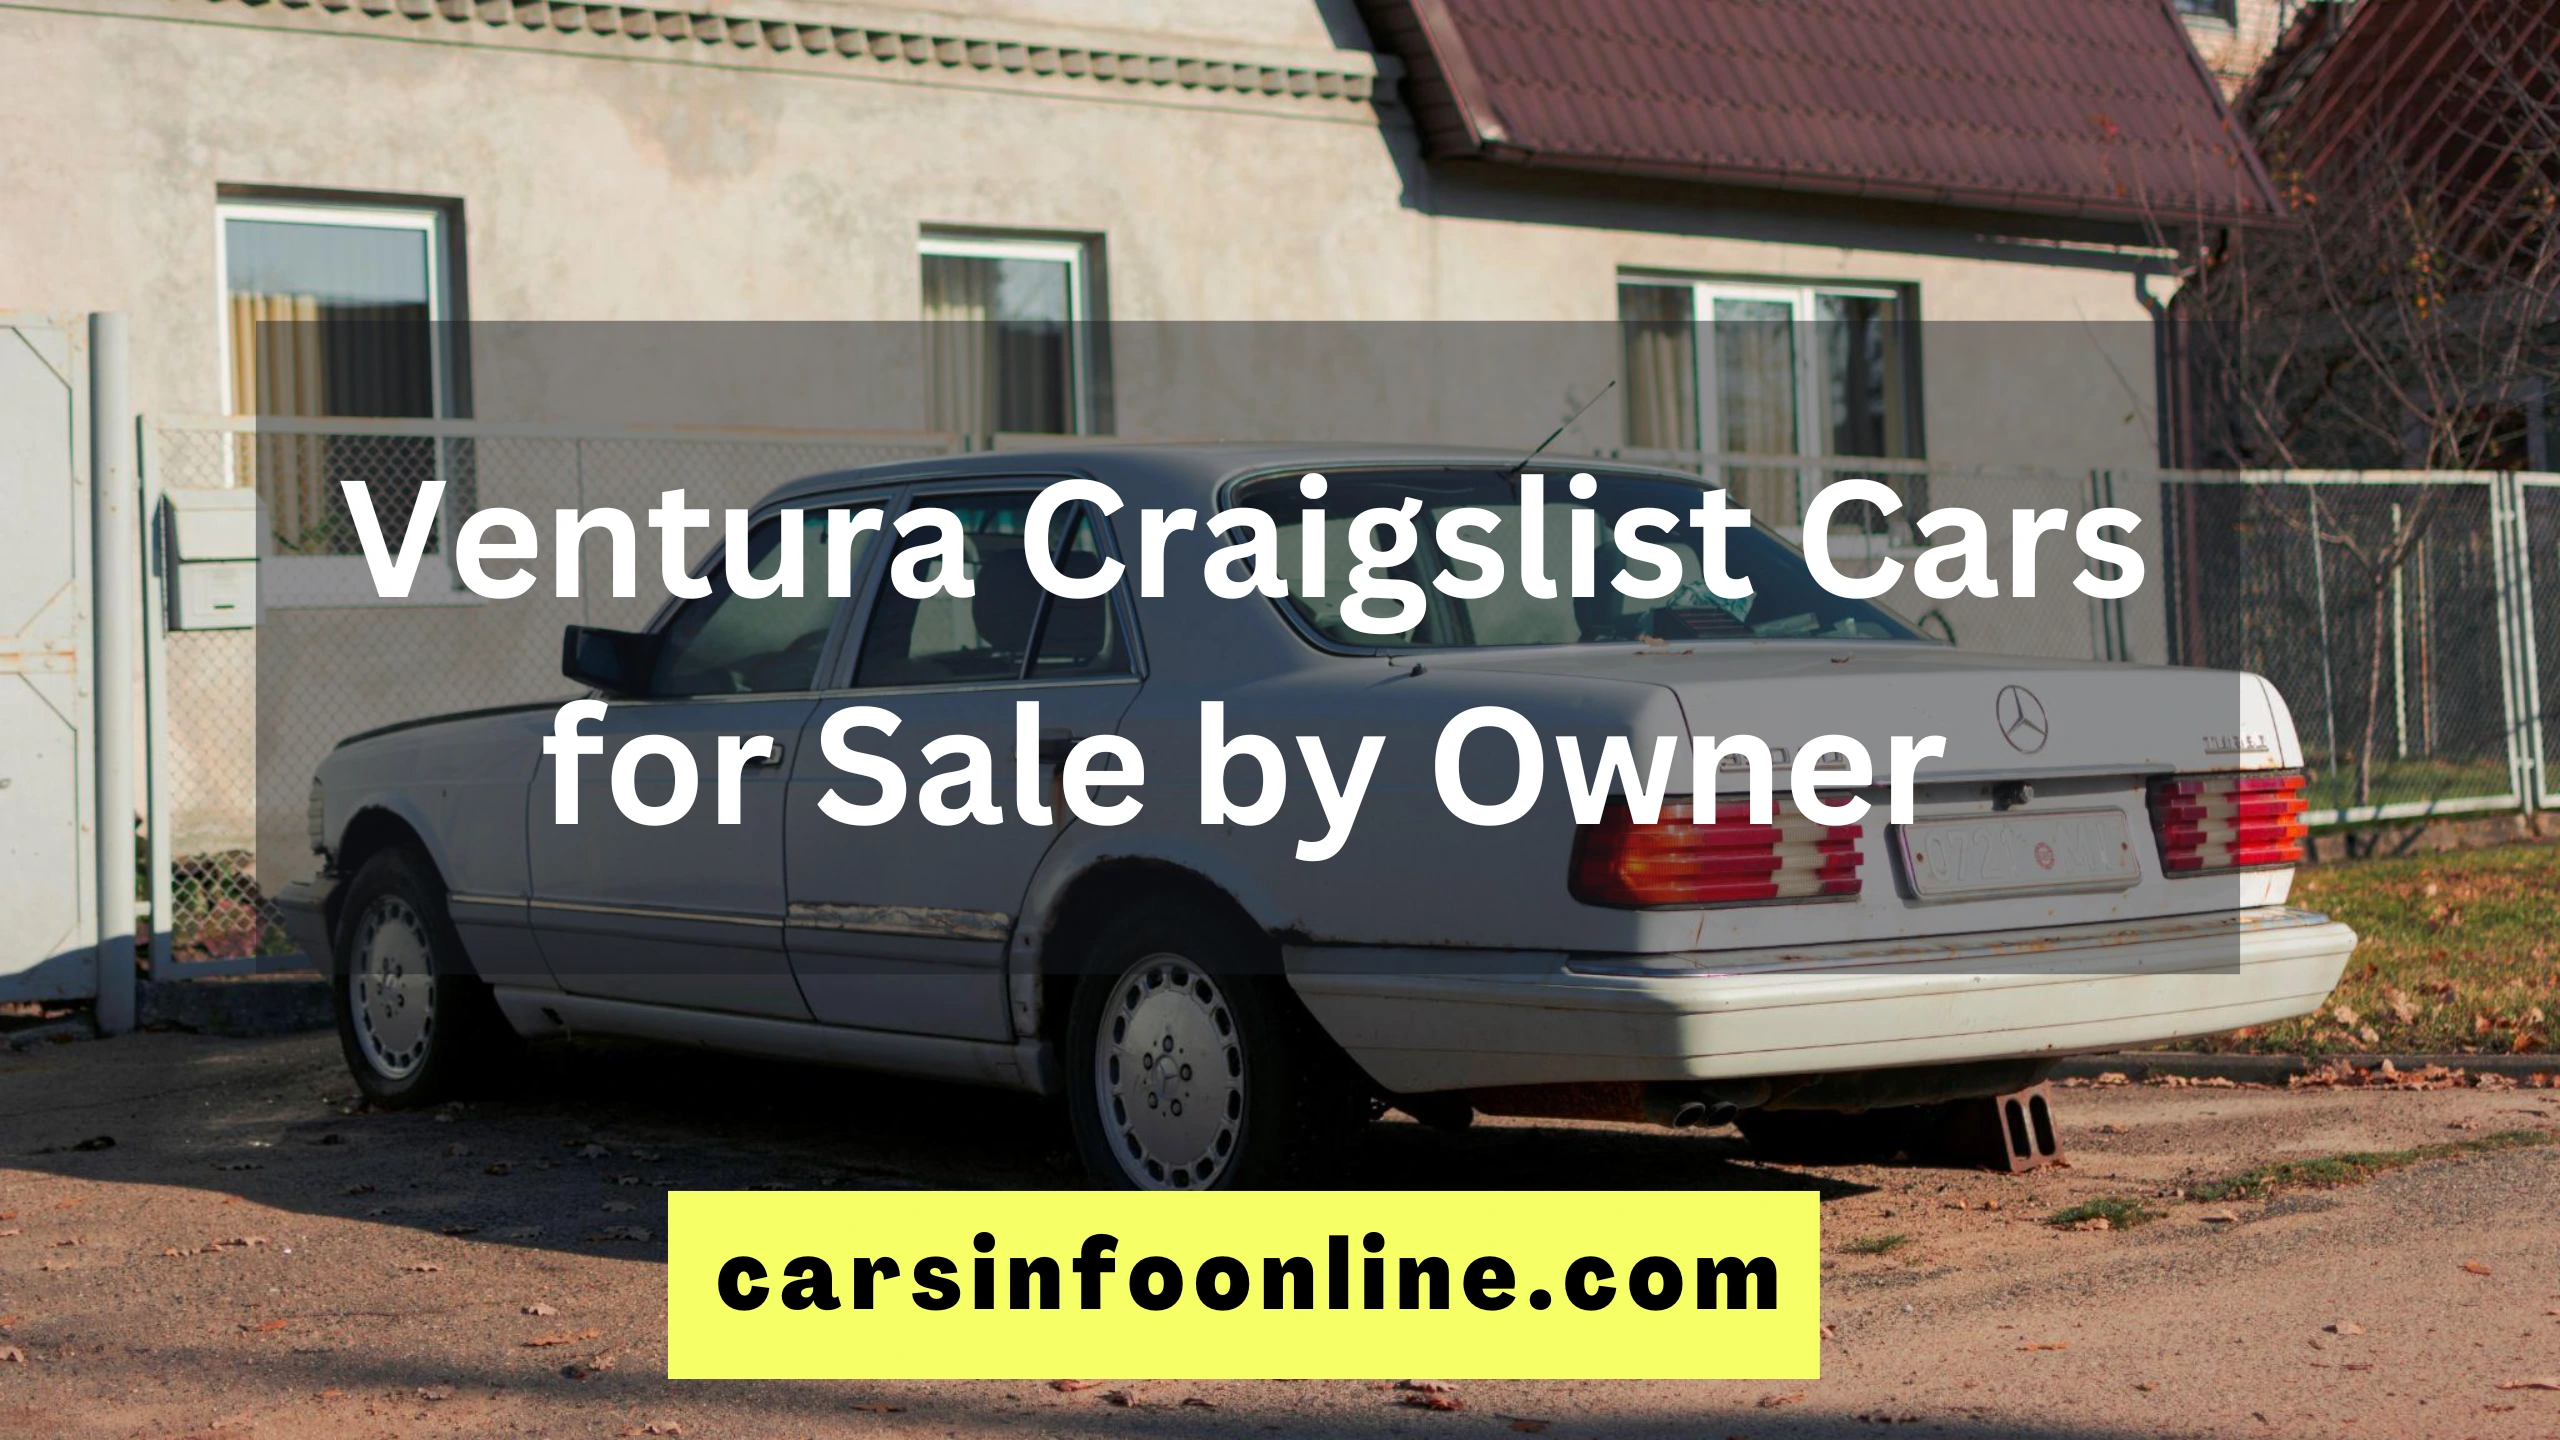 Ventura Craigslist Cars for Sale by Owner